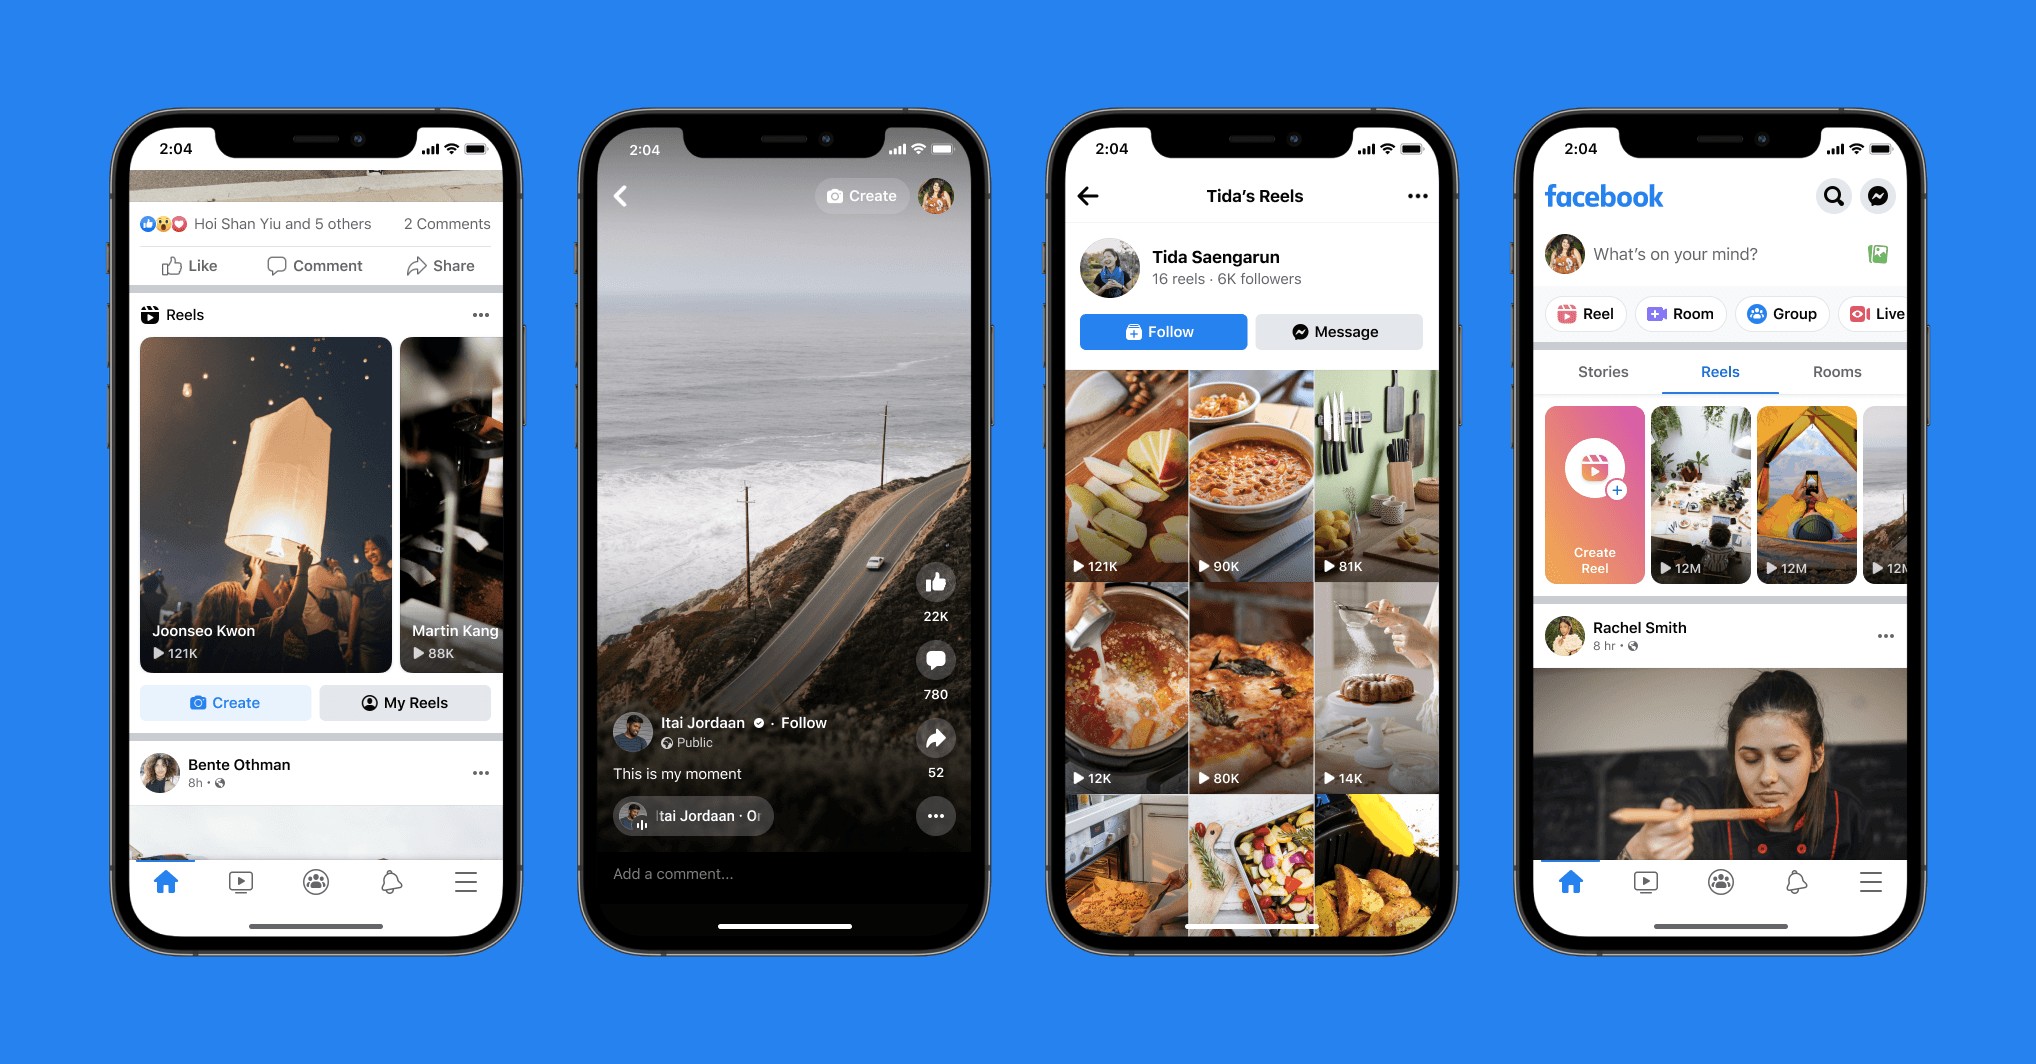 Facebook launches Reels, its short video feature, in over 150 countries